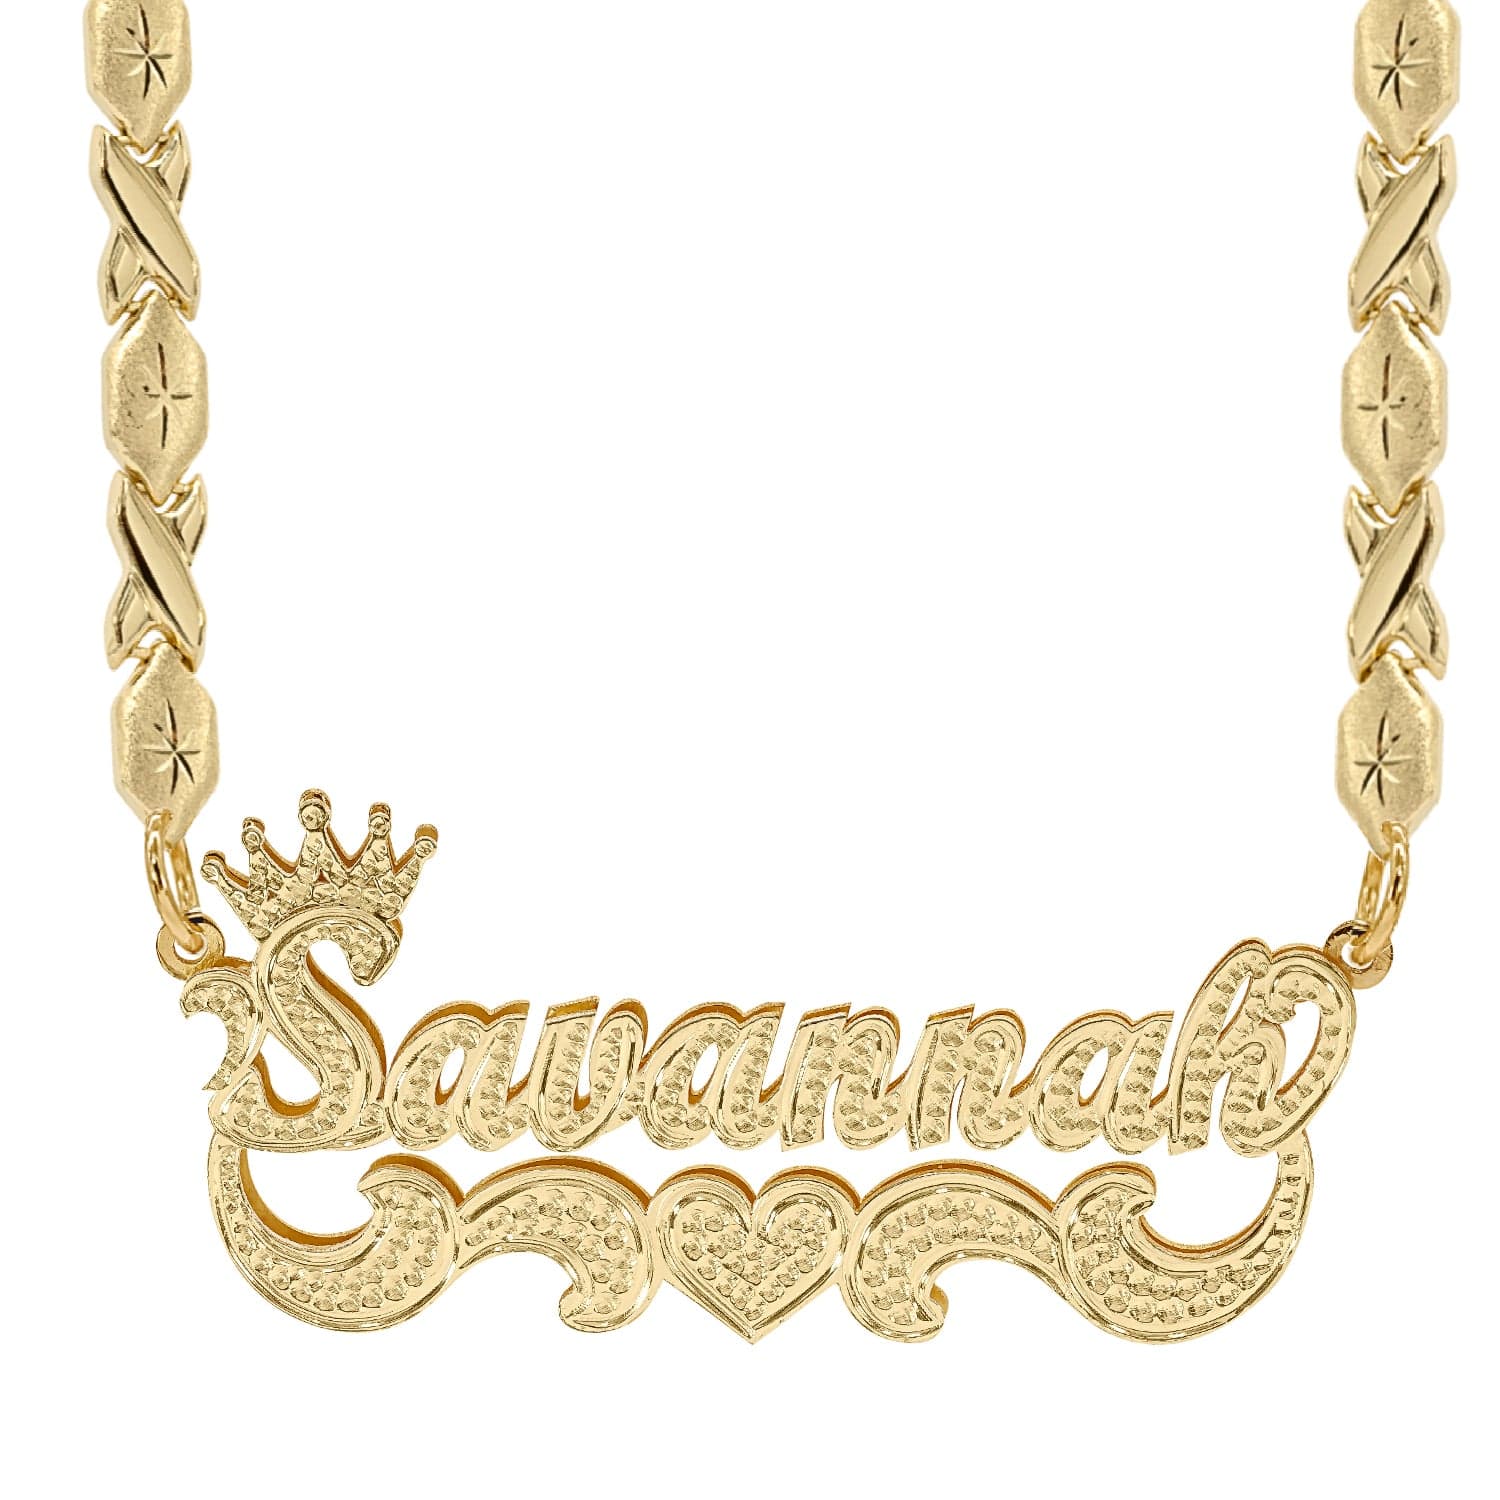 Two-Tone. Sterling Silver / Xoxo Chain Crown Double Plated Name Necklace "Savannah" with Xoxo chain